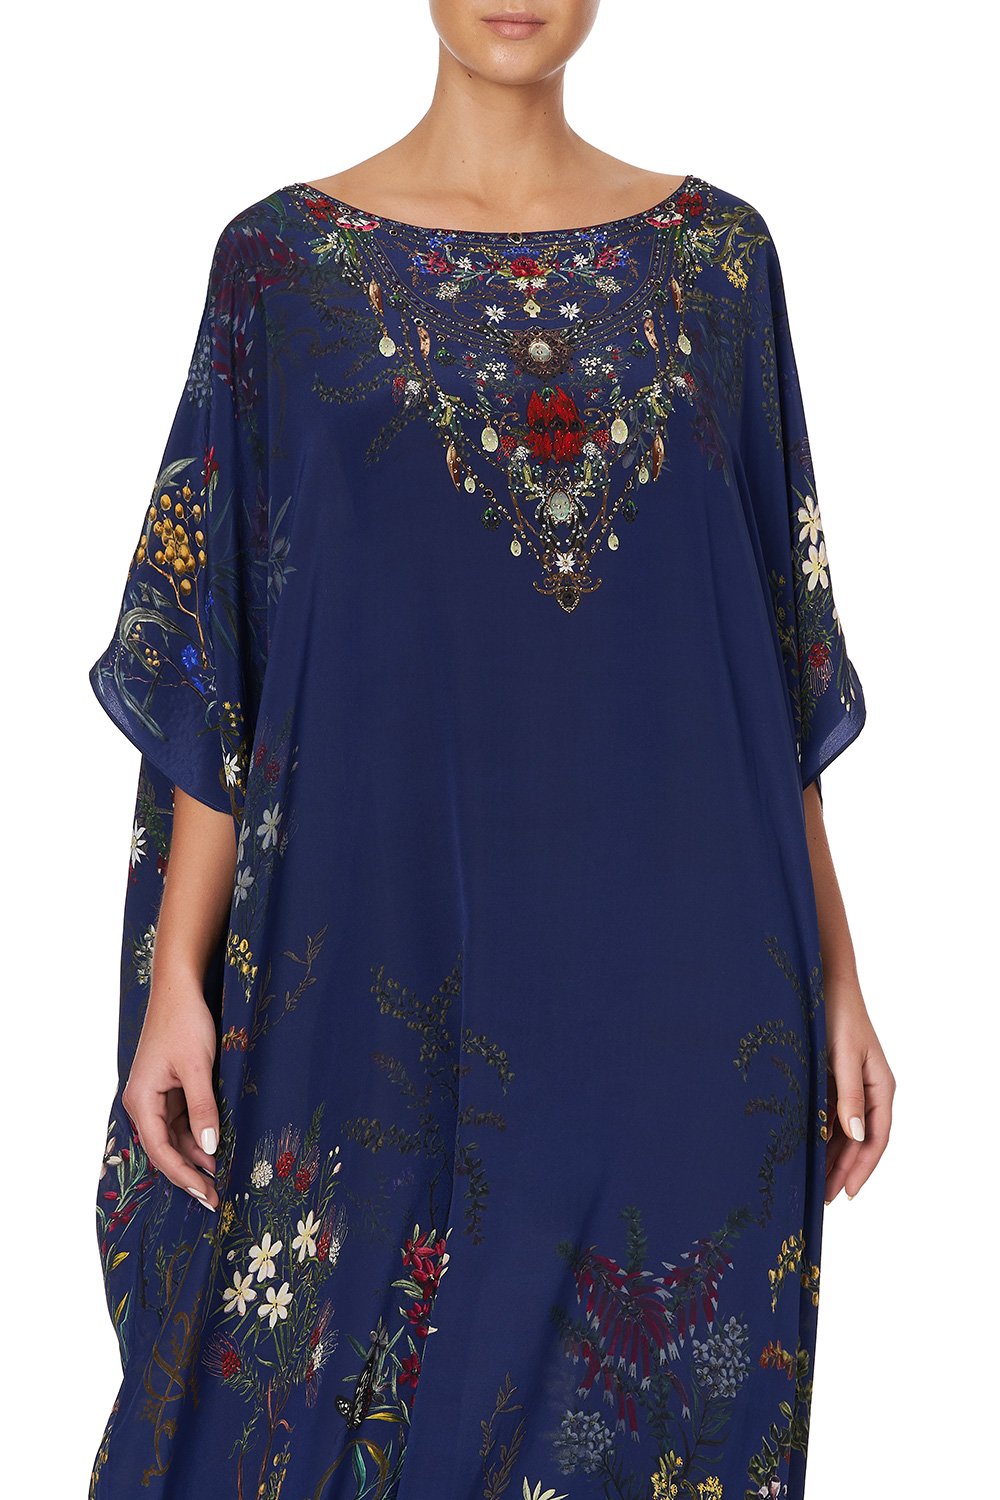 ROUND NECK KAFTAN WINGS IN ARMS